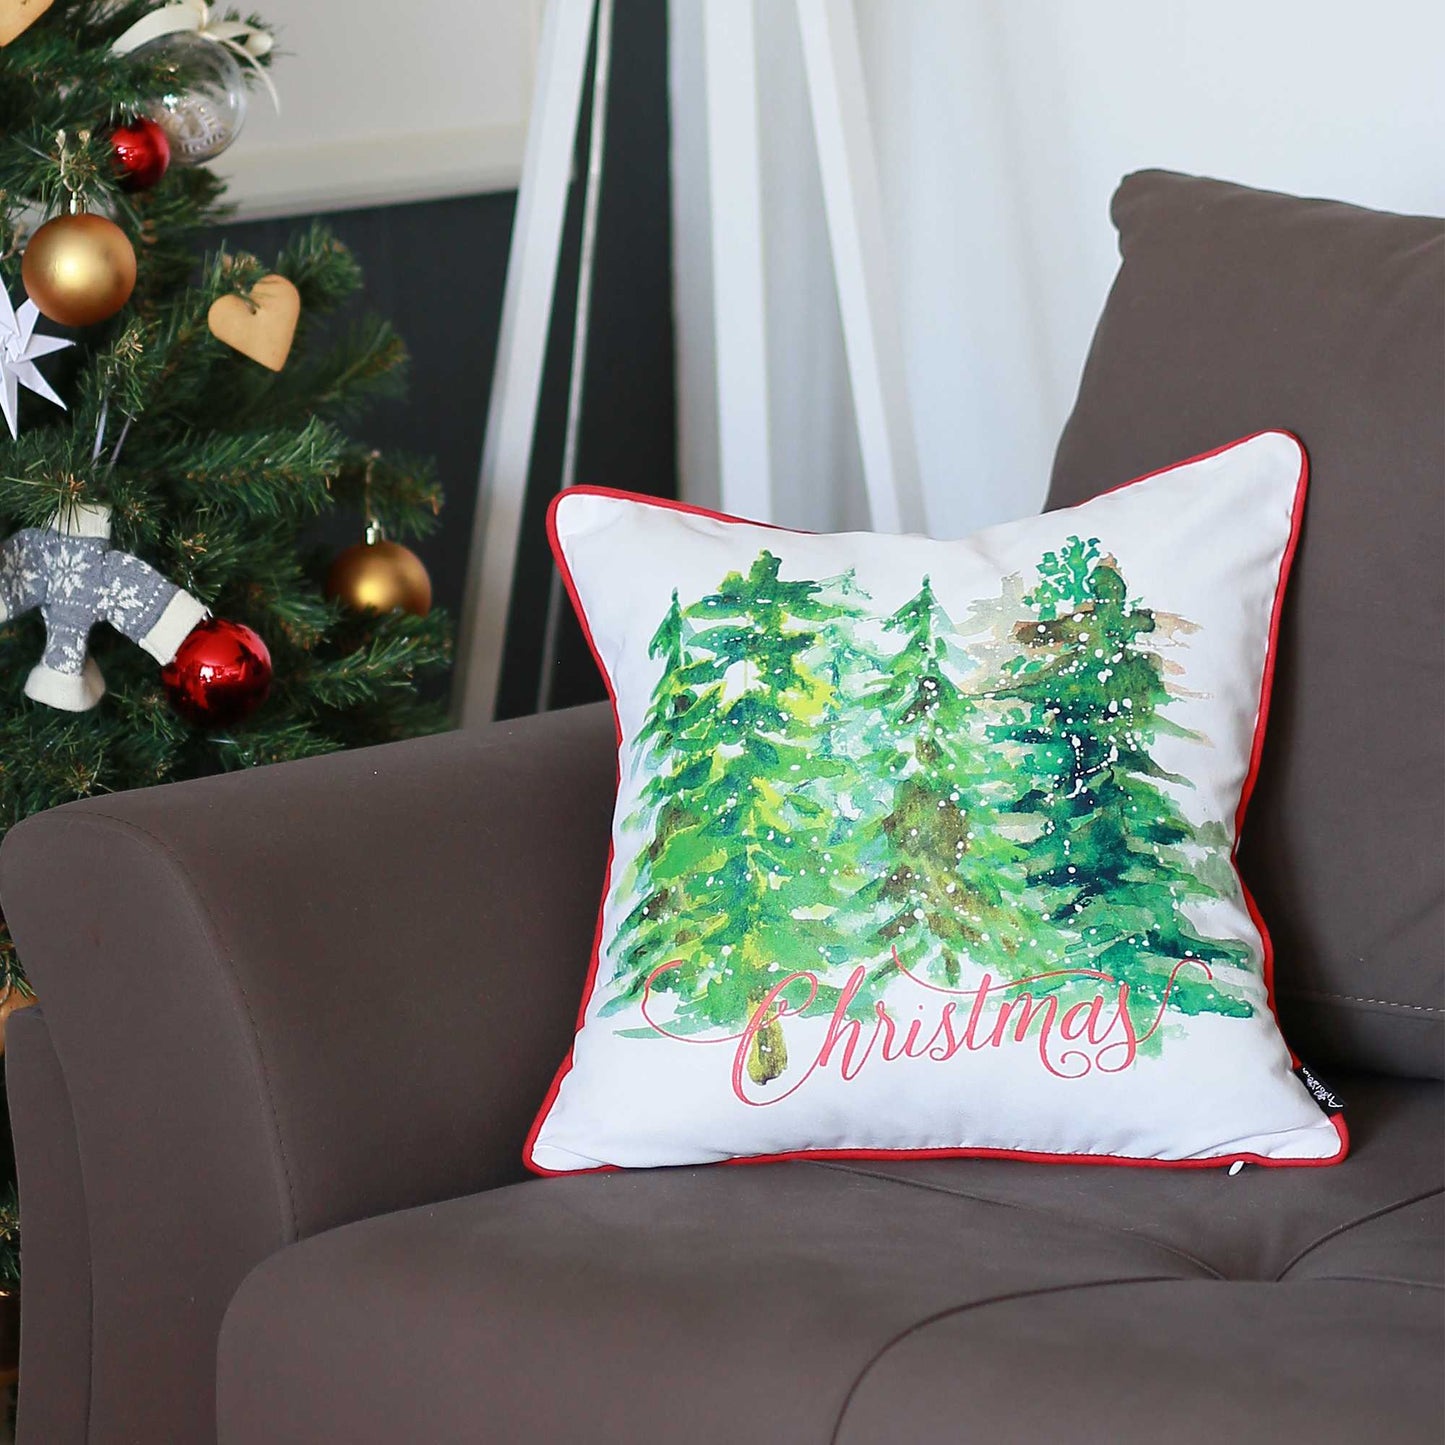 18"x18" Christmas Trees Printed Decorative Throw Pillow Cover